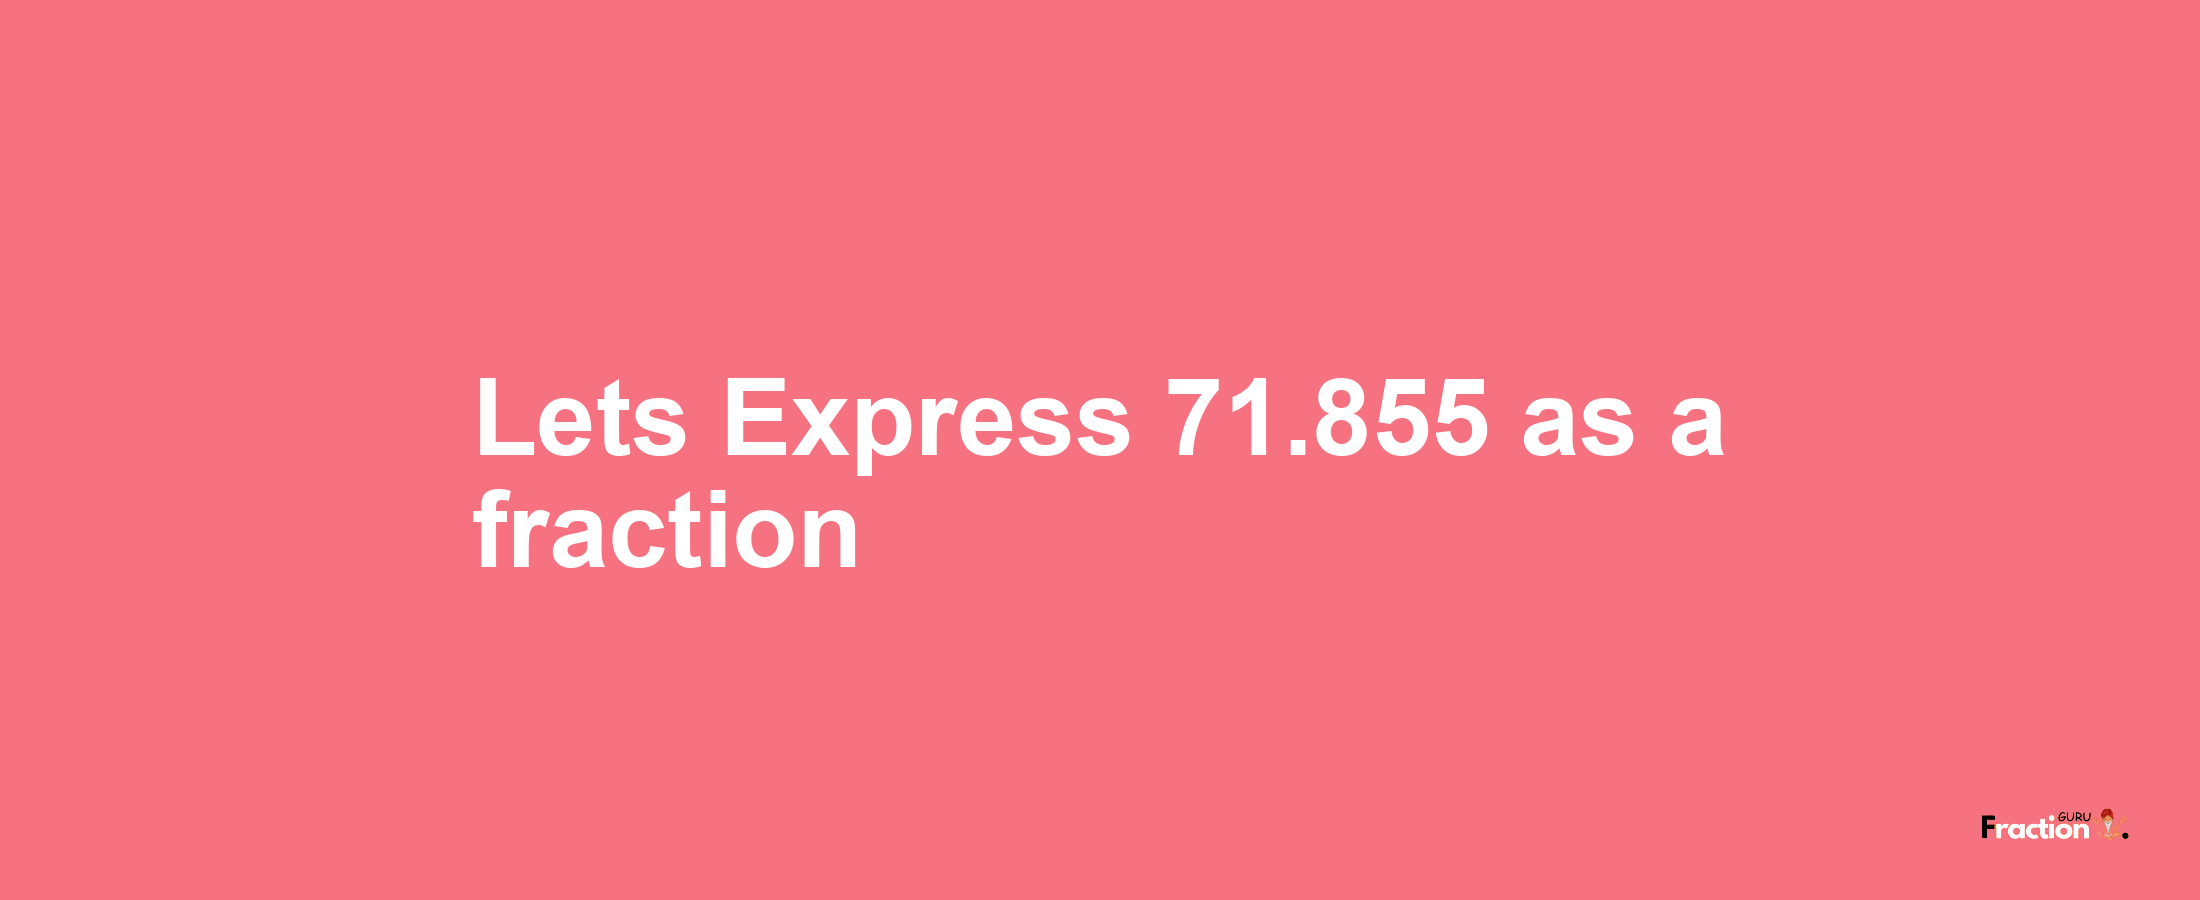 Lets Express 71.855 as afraction